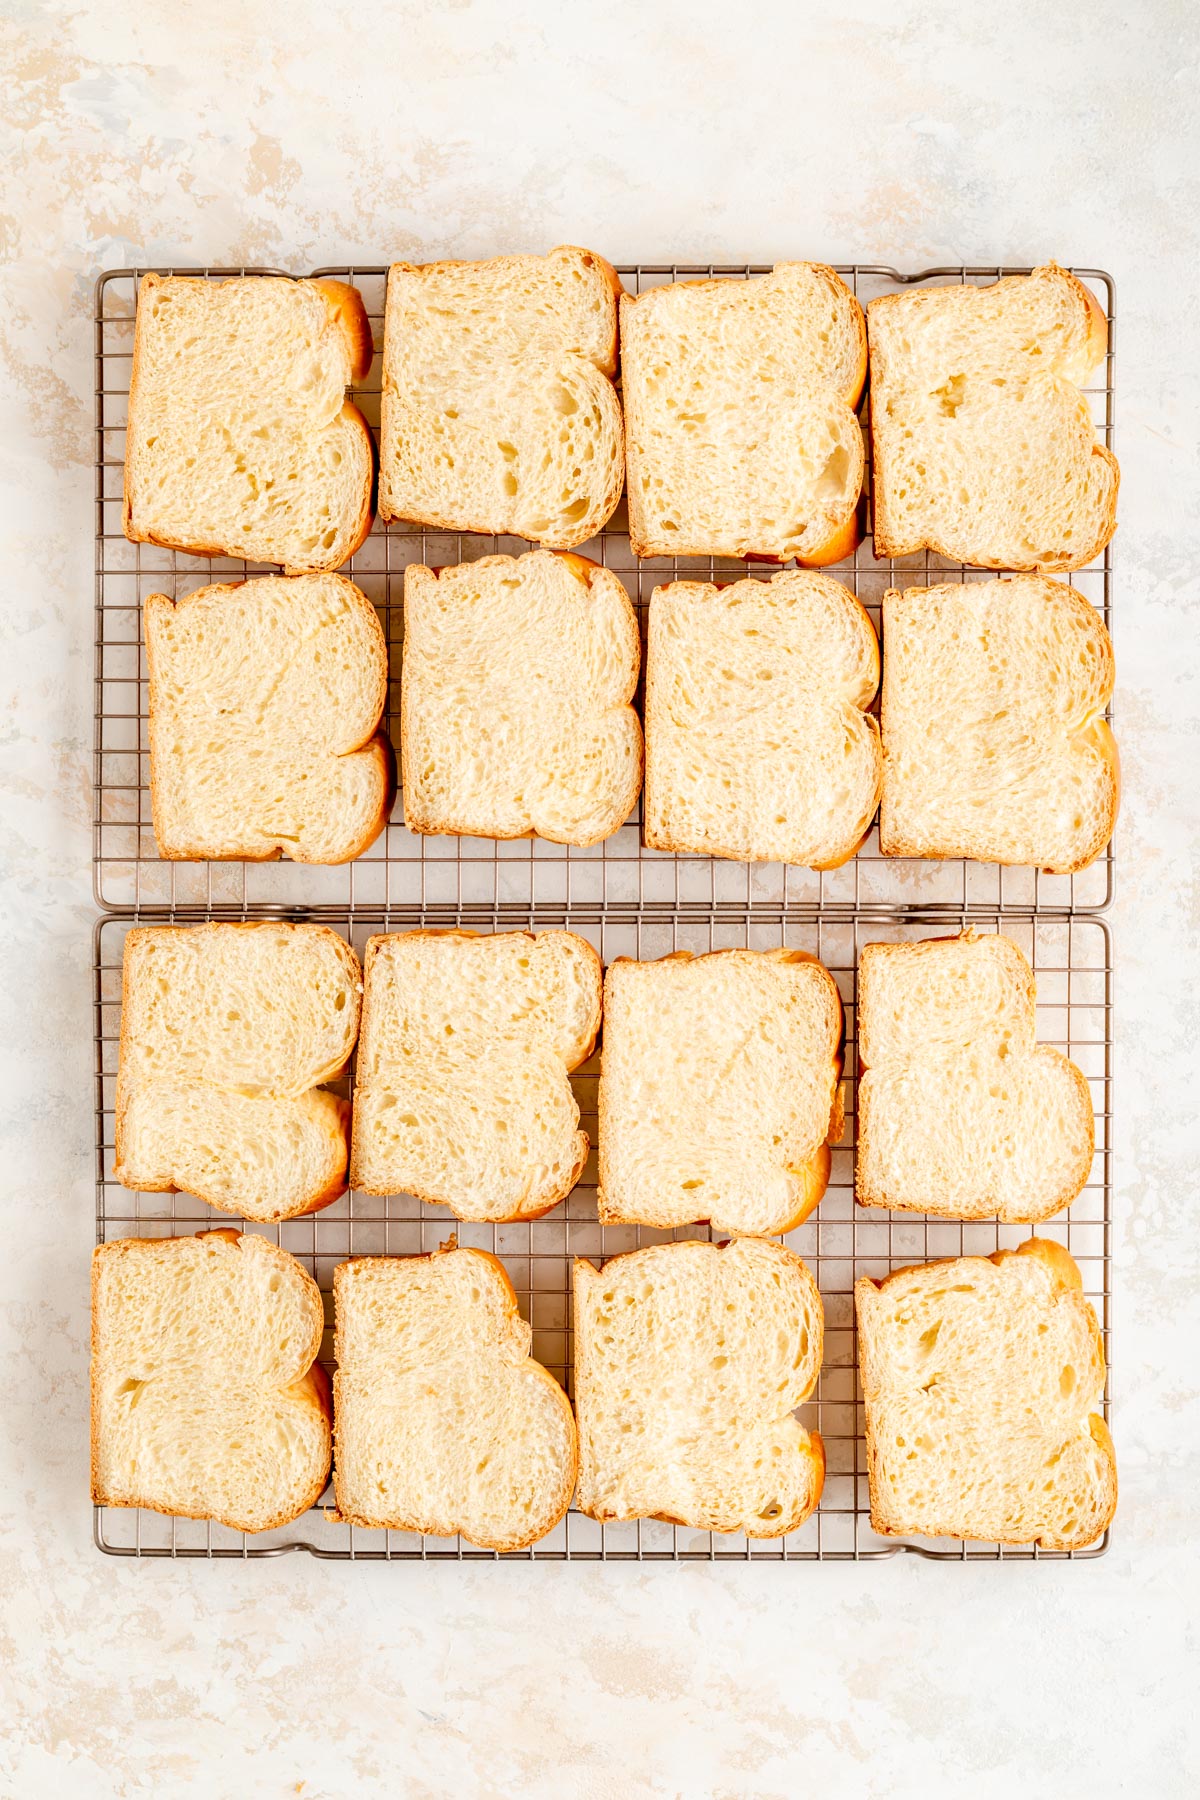 sixteen brioche bread slices spread out on cooling racks on white plaster background.